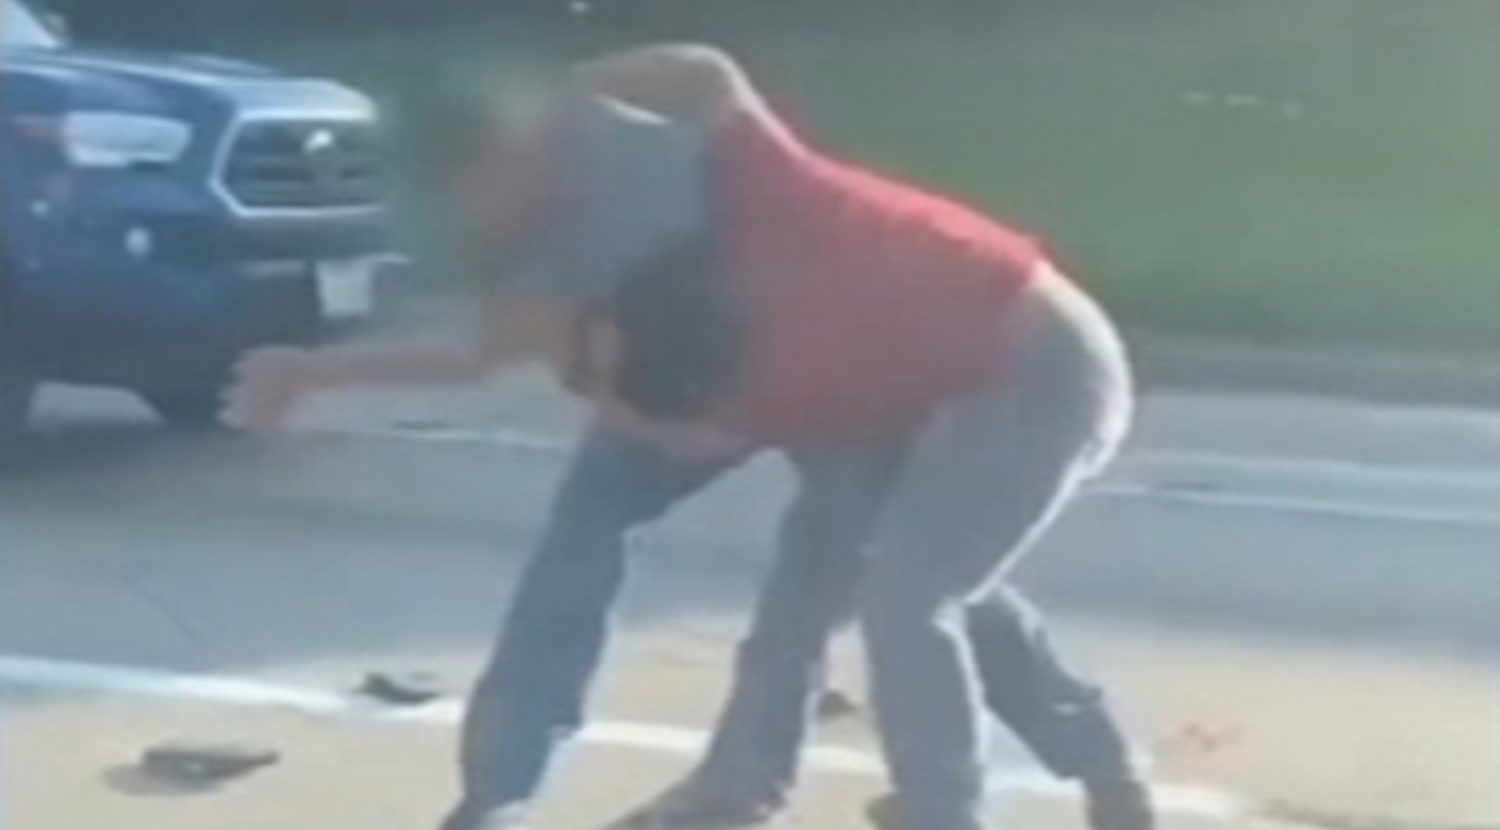 Vicious Road Rage Fight Between A Man And Woman After She ‘cut Him Off’ In Traffic